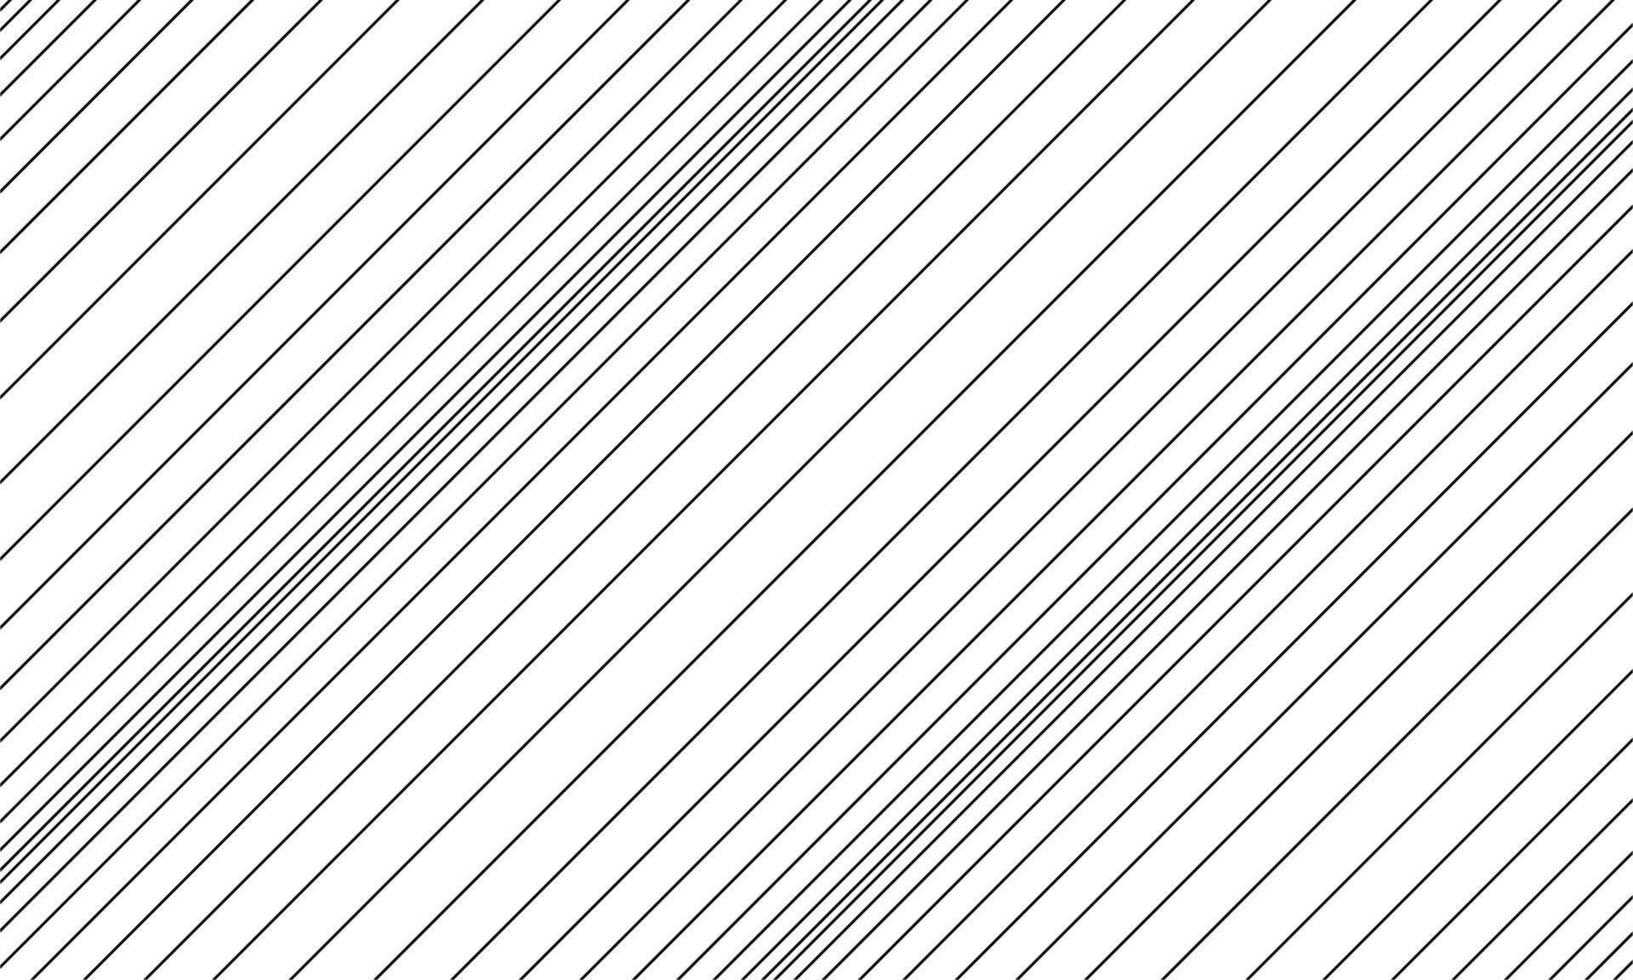 Seamless Lines Motifs Pattern for Decoration, Background, Texture, Website or Graphic Design Element. Vector Illustration